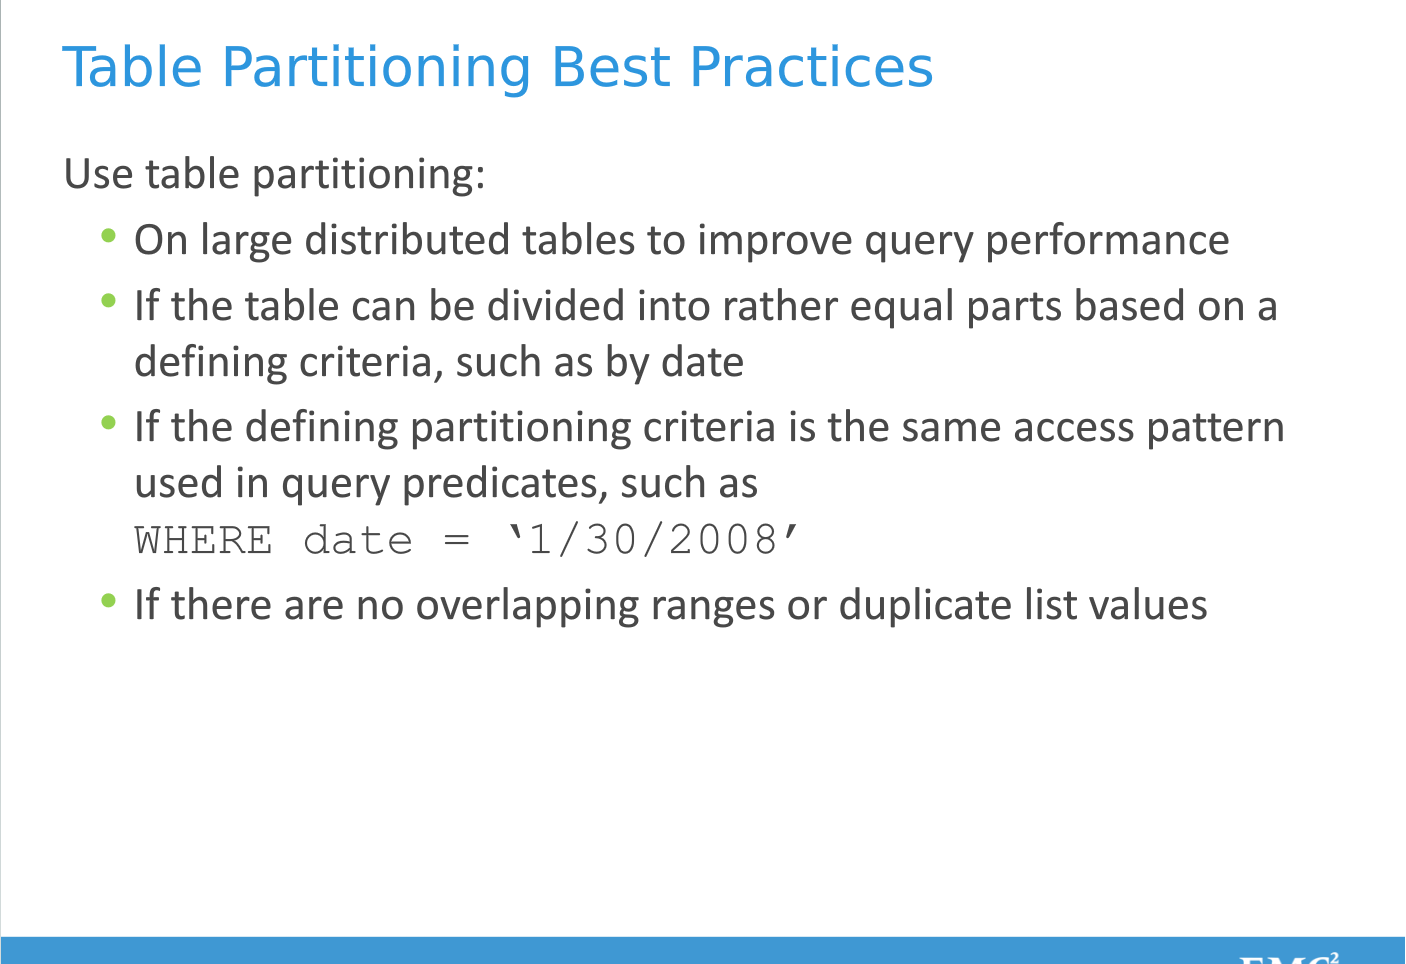 table_partitioning_best_practices.png